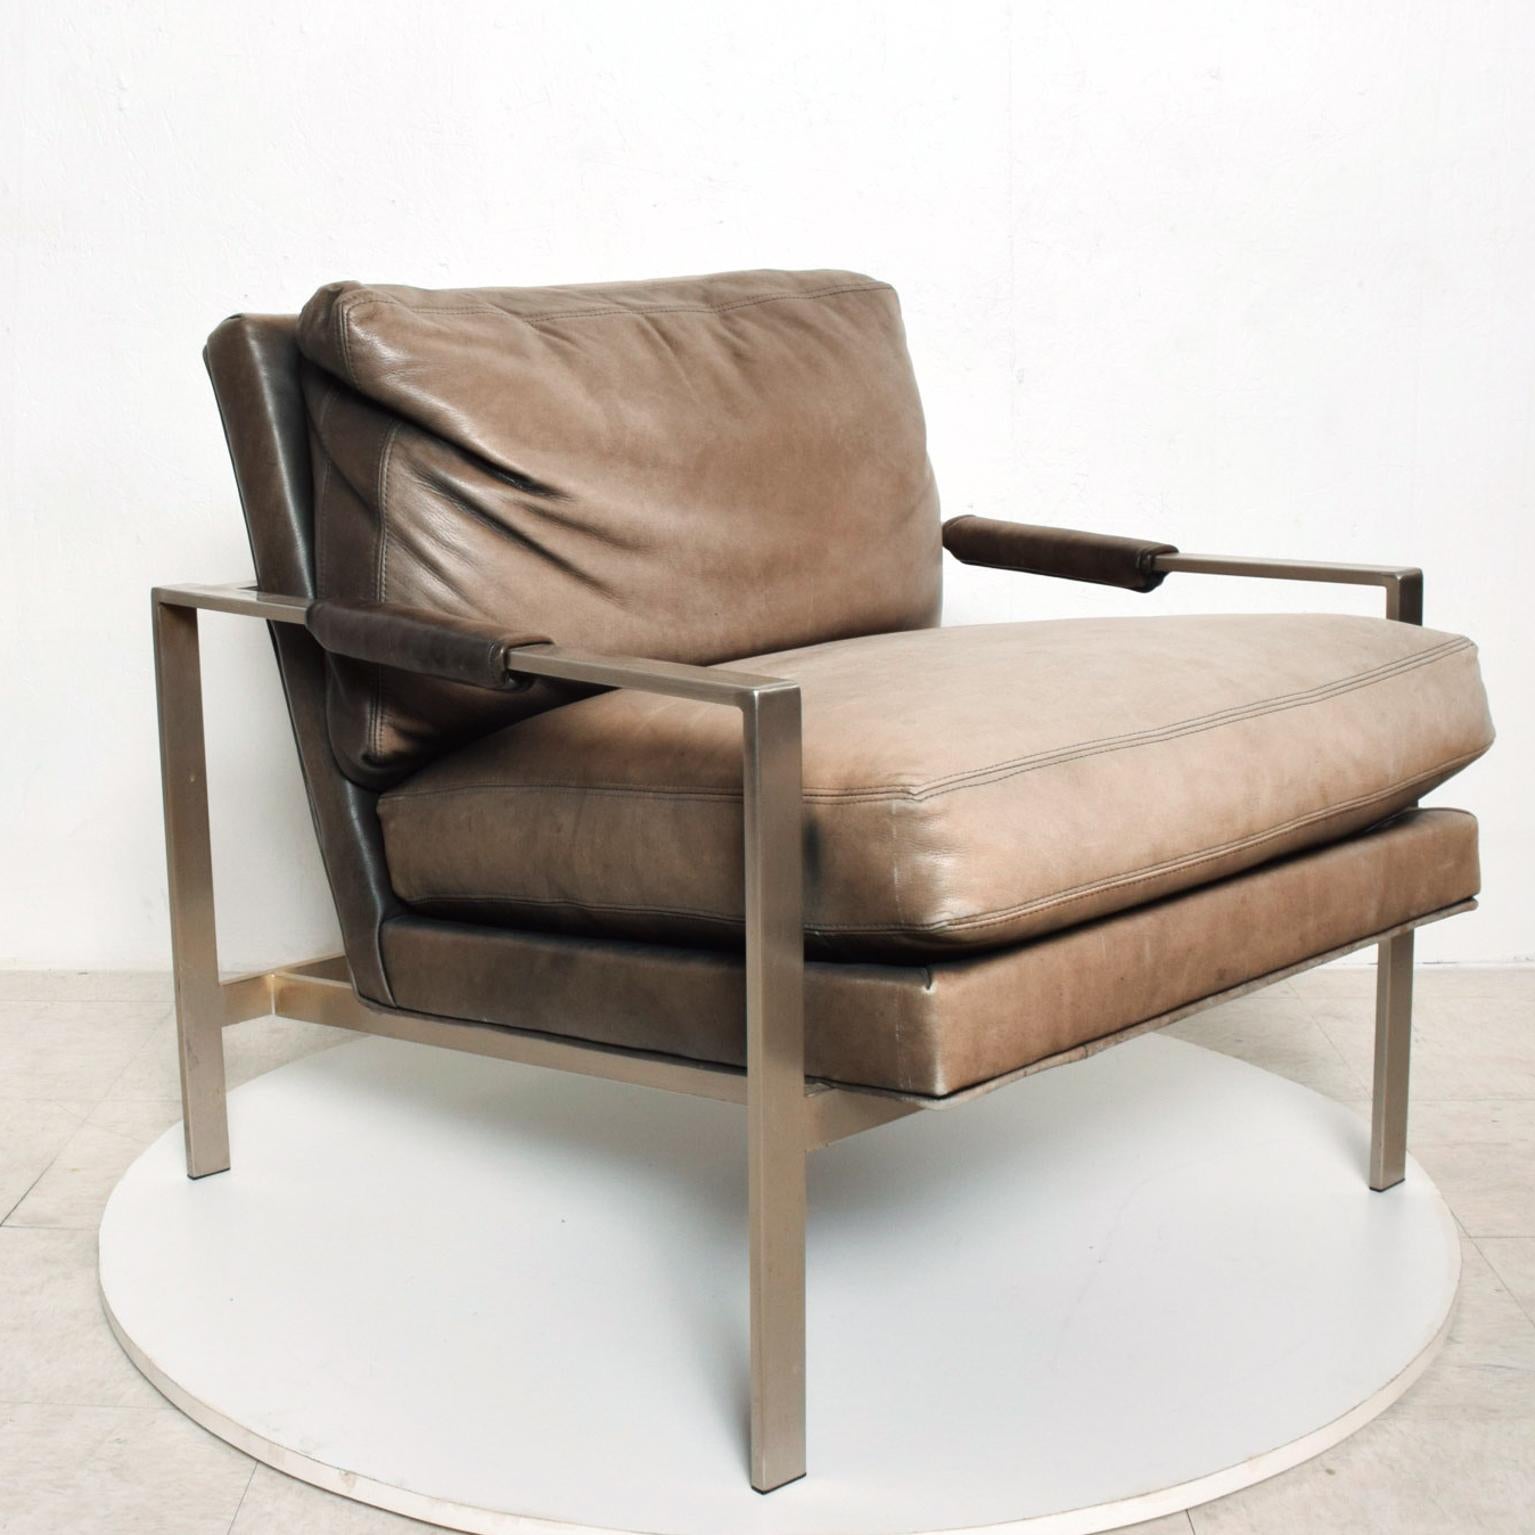 American Mid-Century Modern Lounge Chair by Milo Baughman for Thayer Coggin